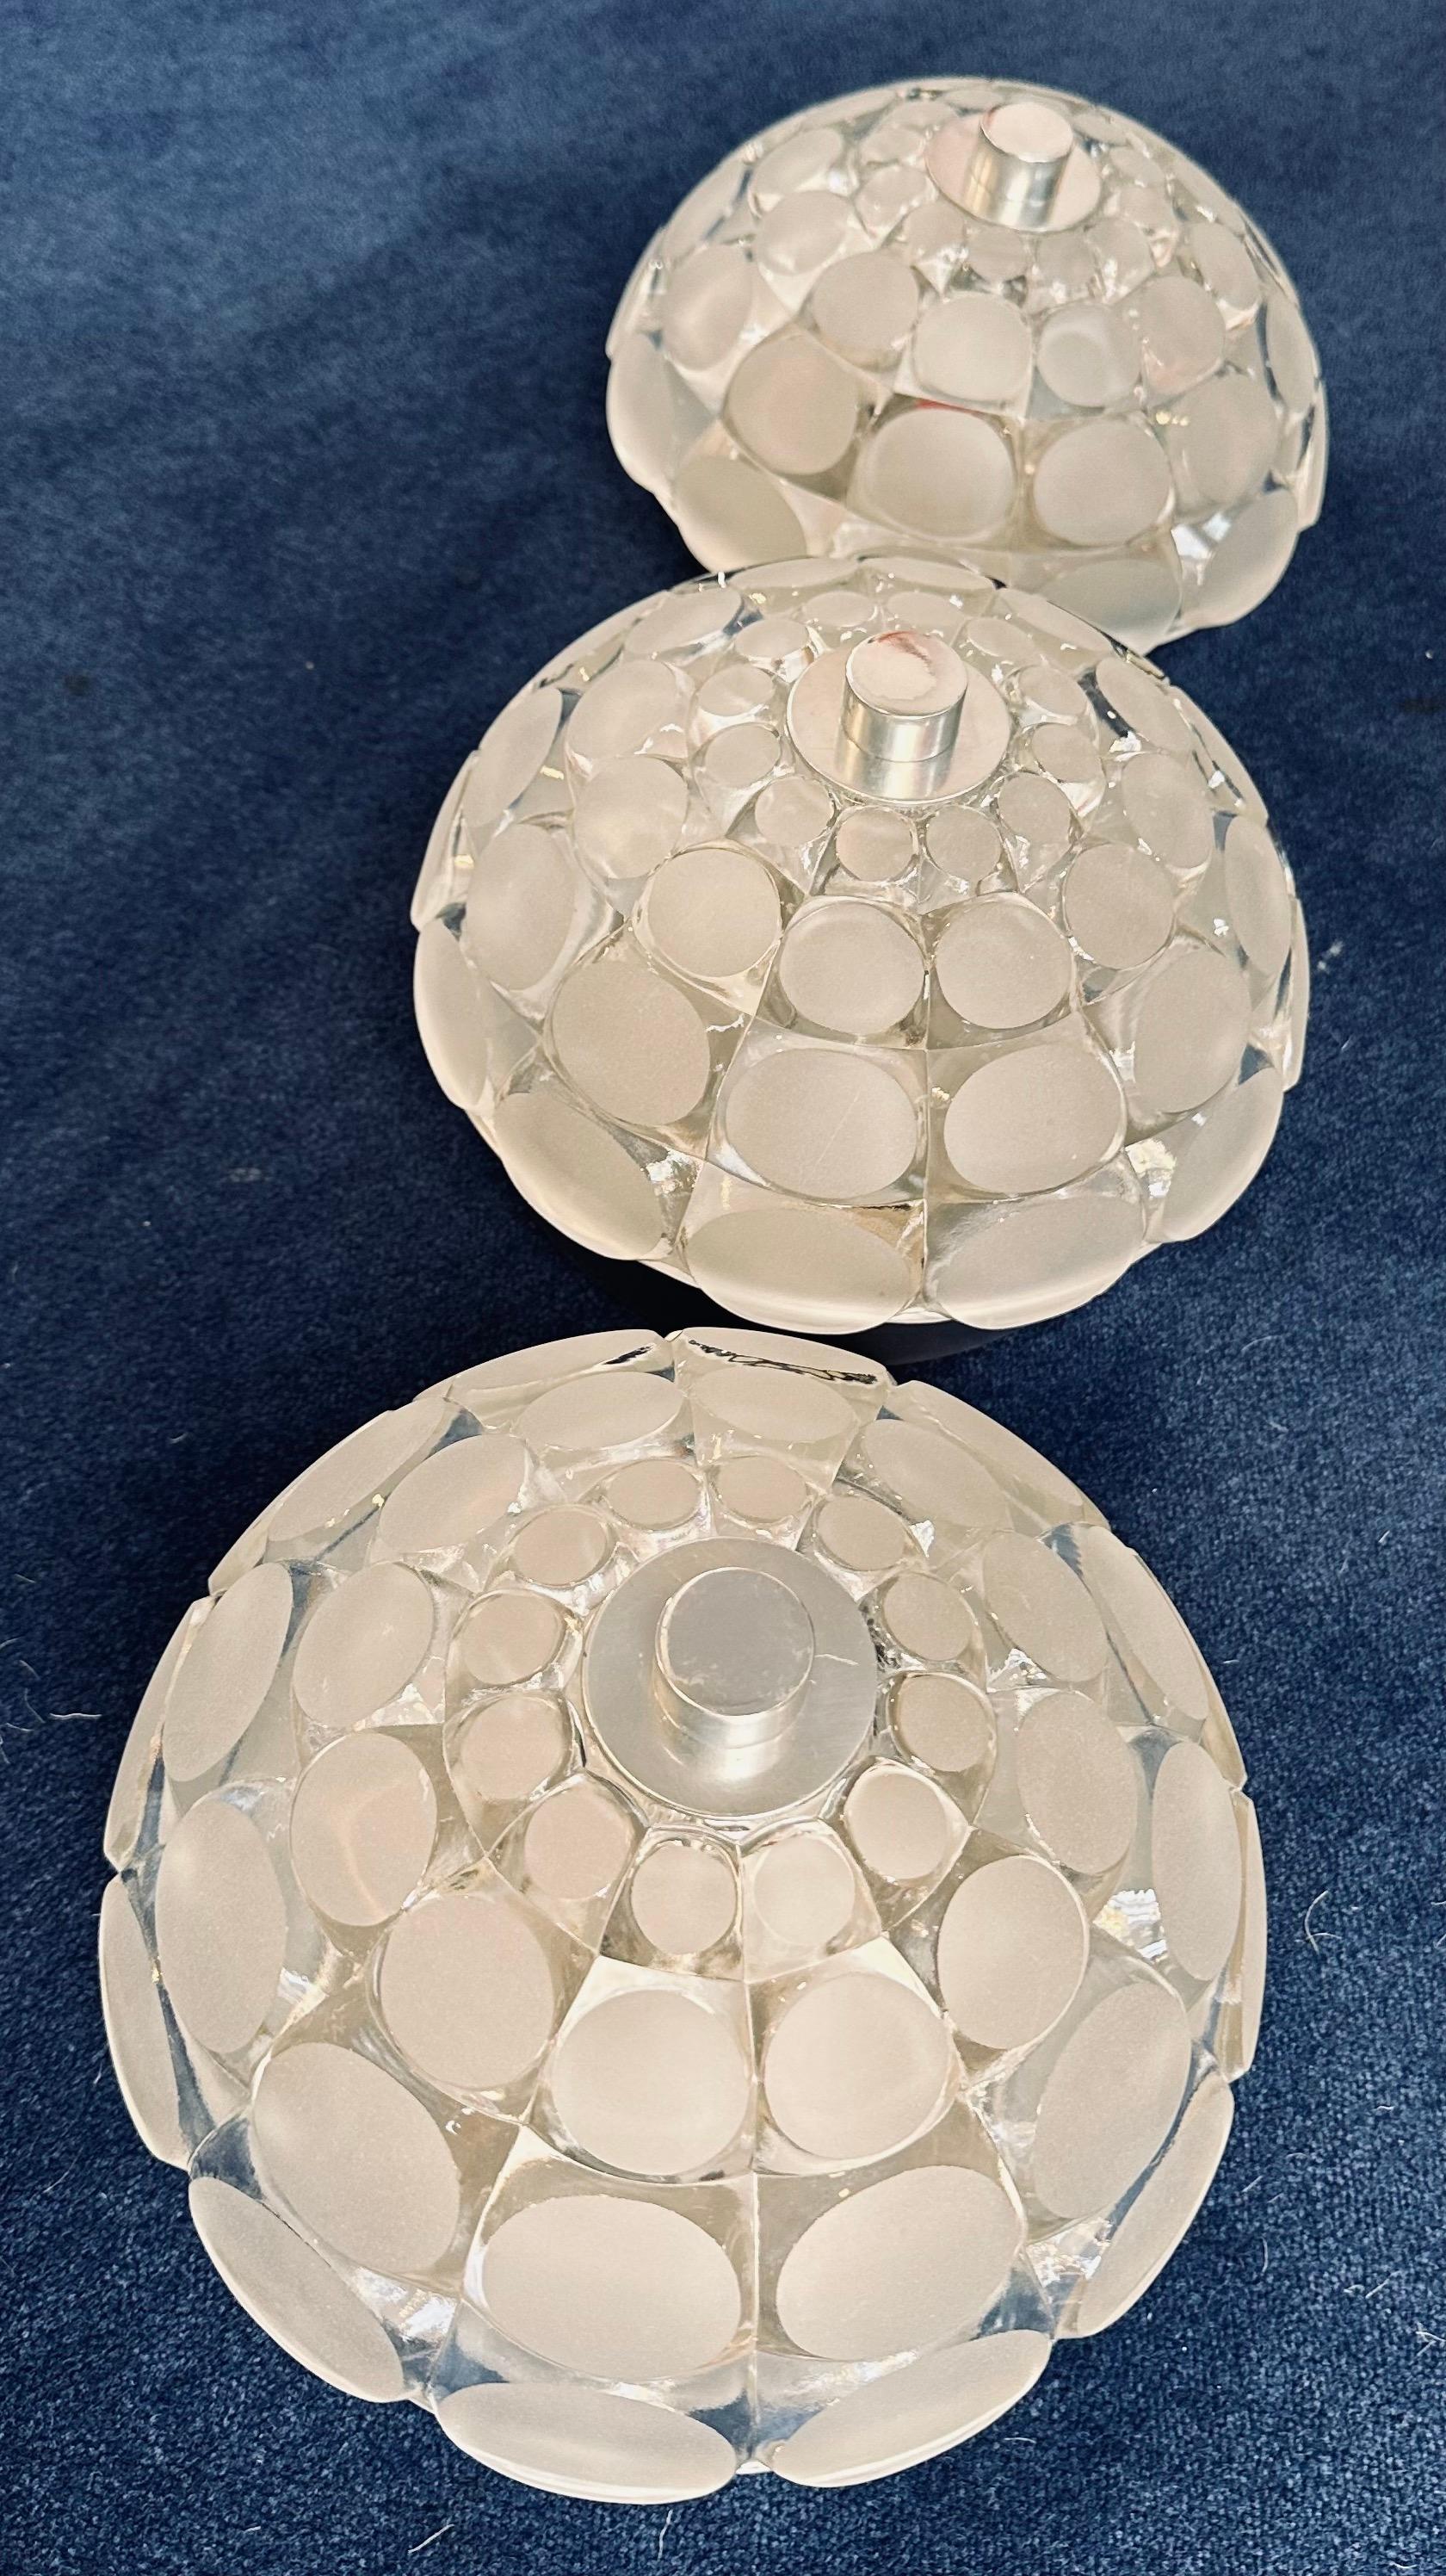 Unusual 1970s German Peill & Putzler wall lights which could also be used as ceiling flush mounts for a small room perhaps a bathroom/cloackroom or along a hallway with a low ceiling. The circular glass shade is secured to the aluminium fitting with